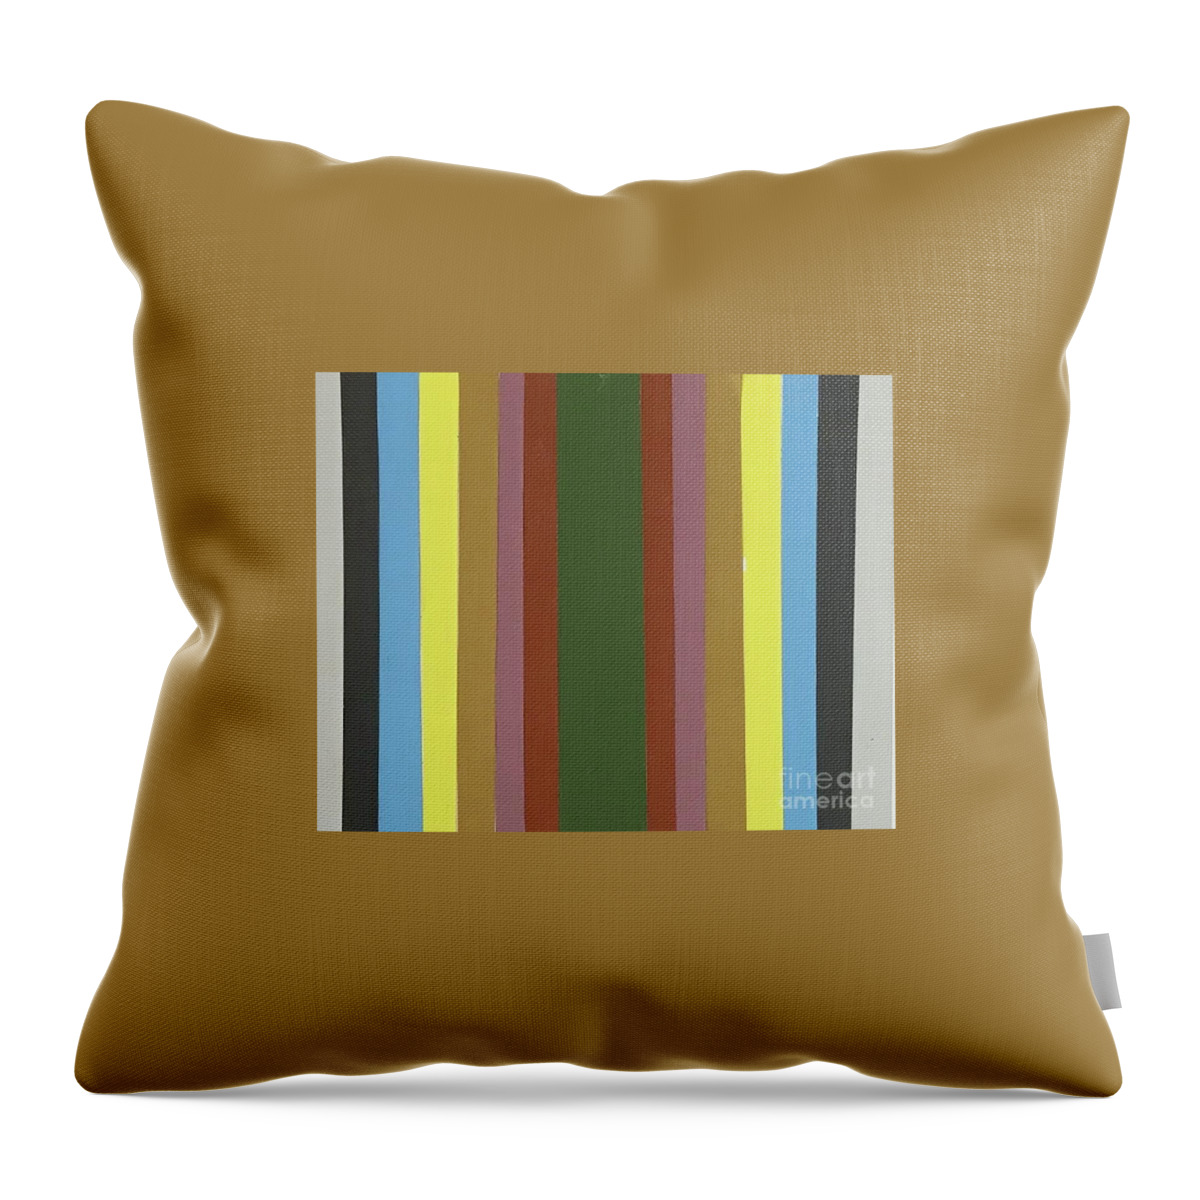 Original Art Work Throw Pillow featuring the mixed media Color Illusion #4 by Theresa Honeycheck